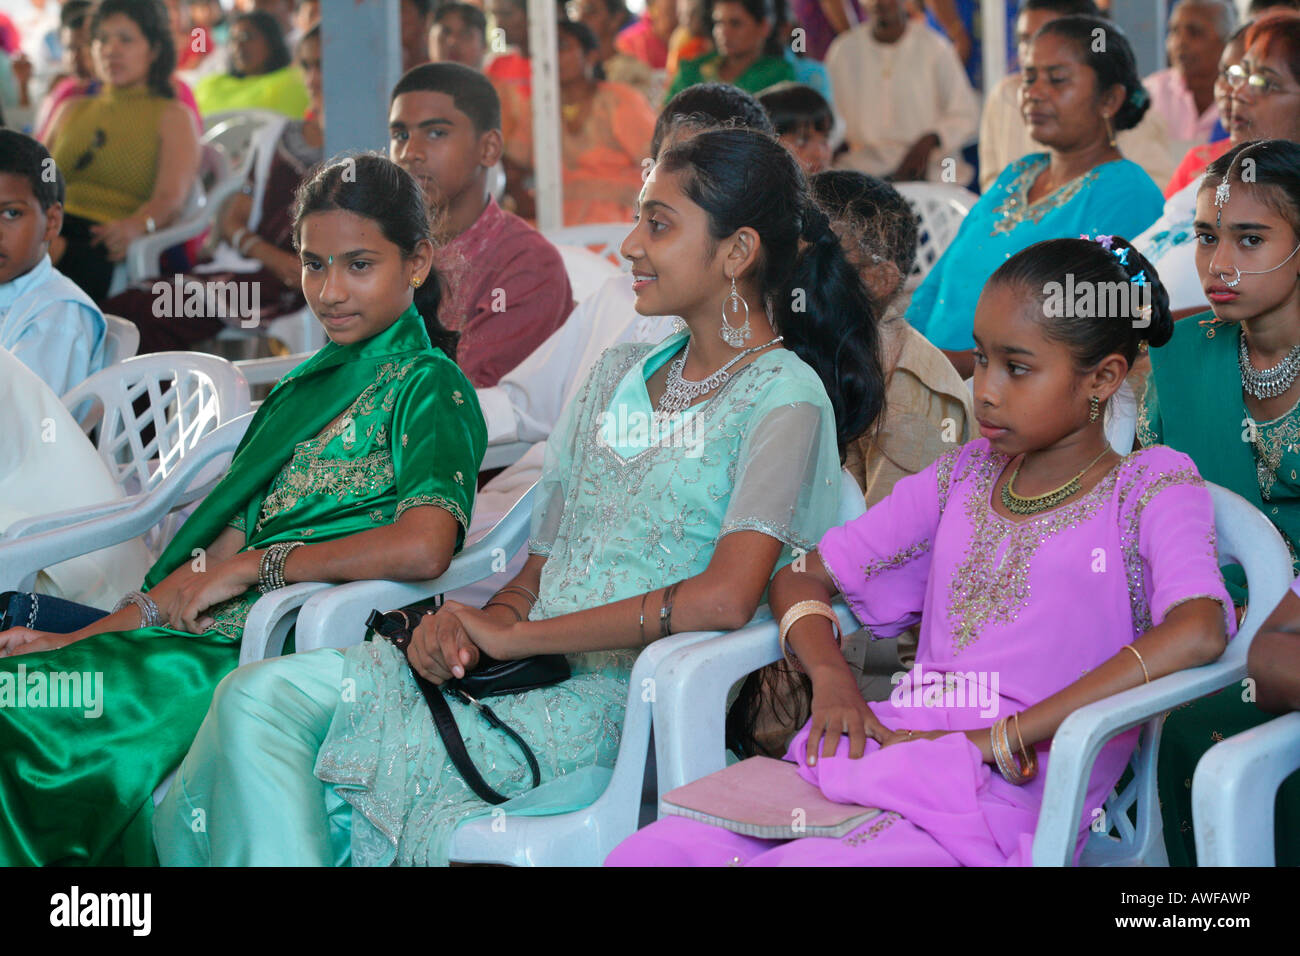 Girls of Indian ethnicity at a Hindu Festival, Georgetown, Guyana, South America Stock Photo